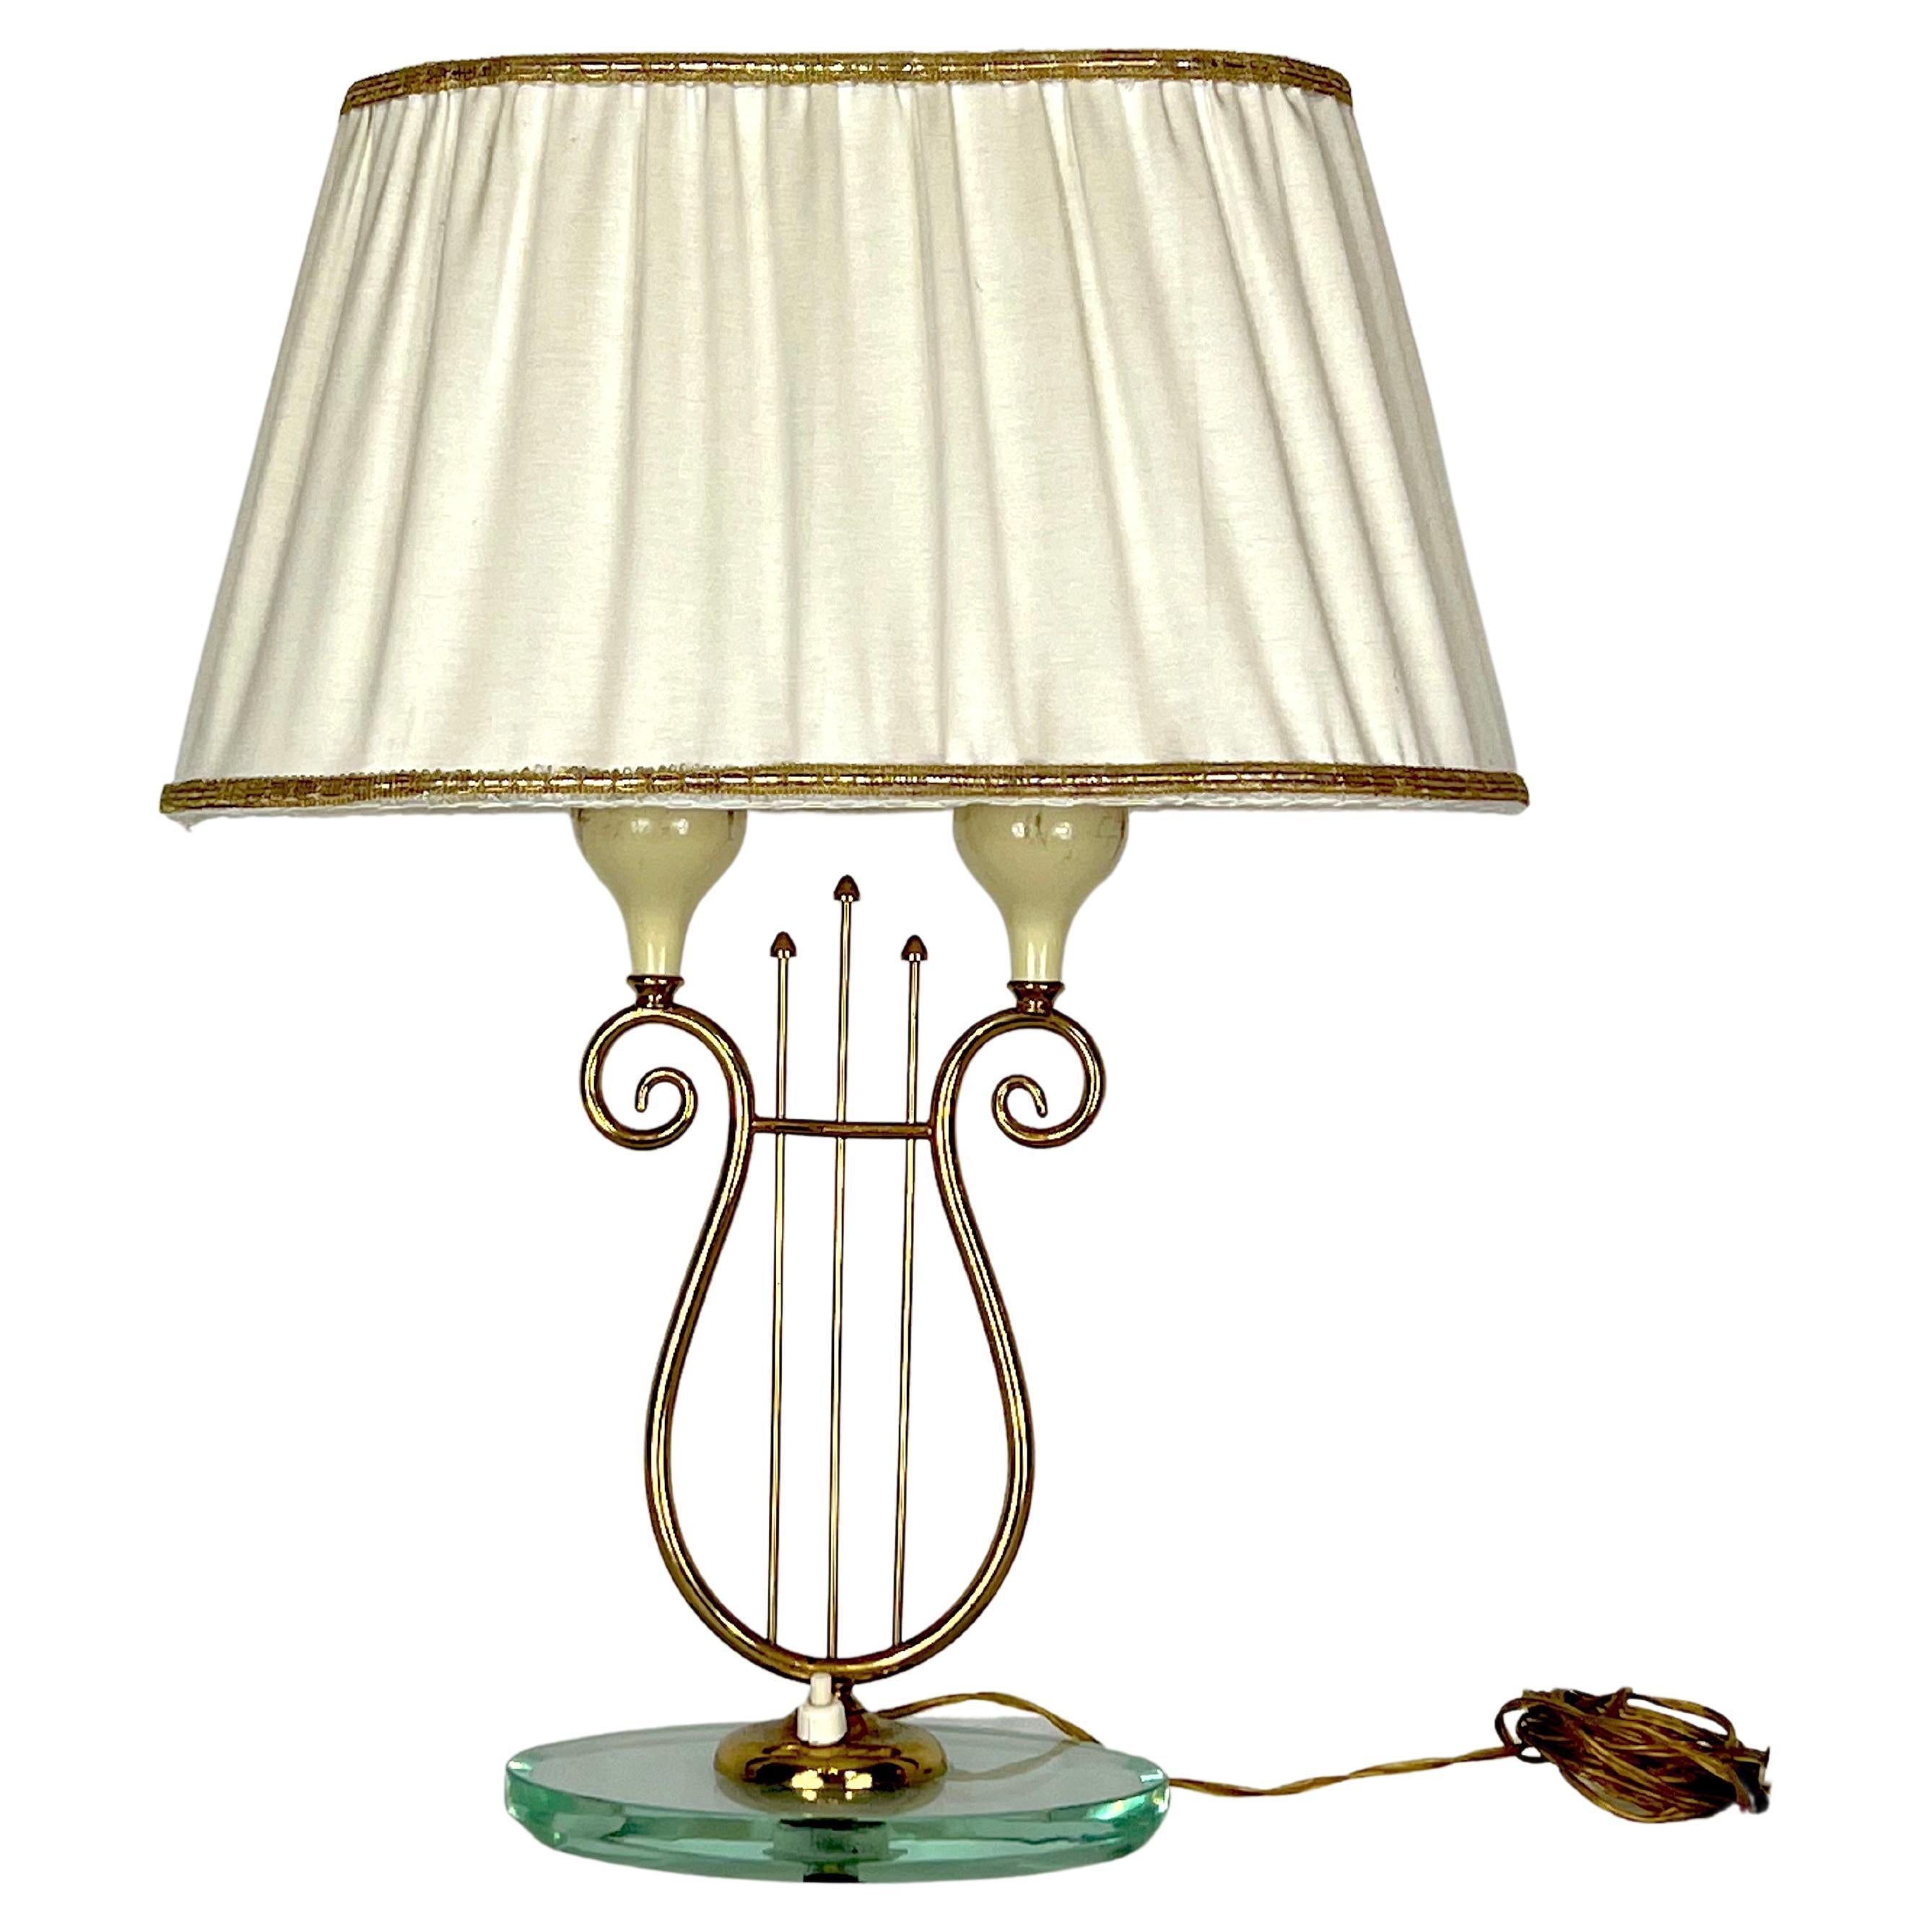 Italian Mid-Century Brass and Glass Table Lamp from 50s